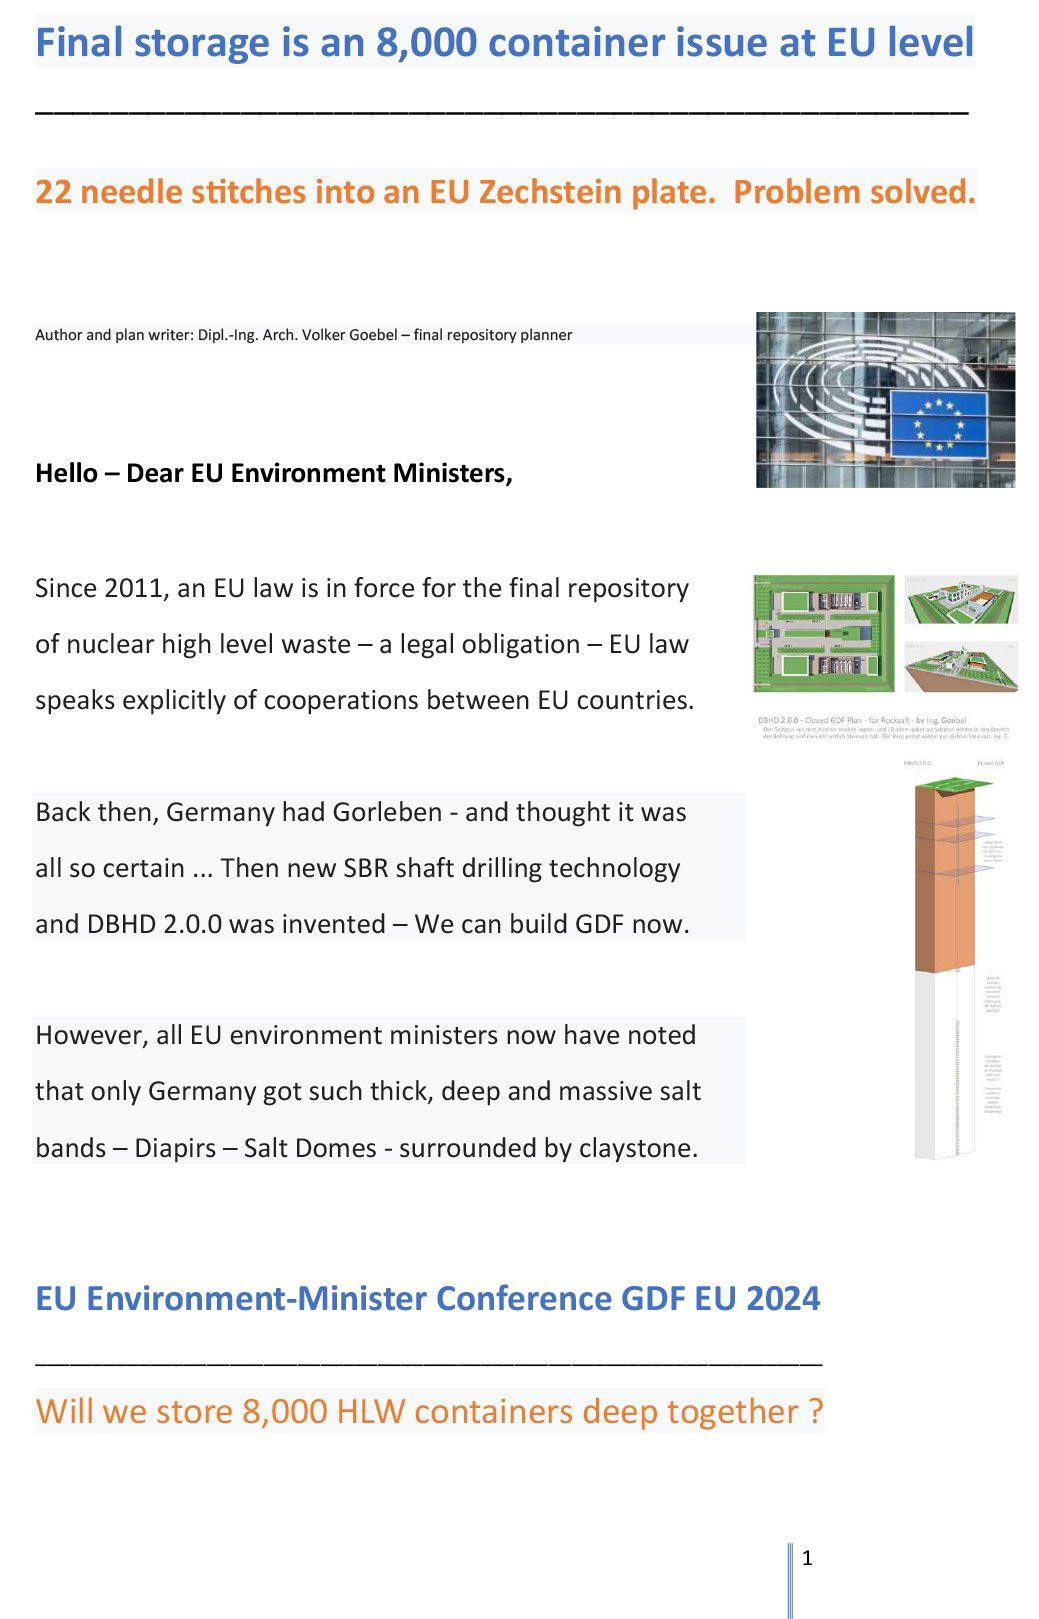 Proposal-for--EU-final-storage-environment-ministerial-conference-in-2024-3